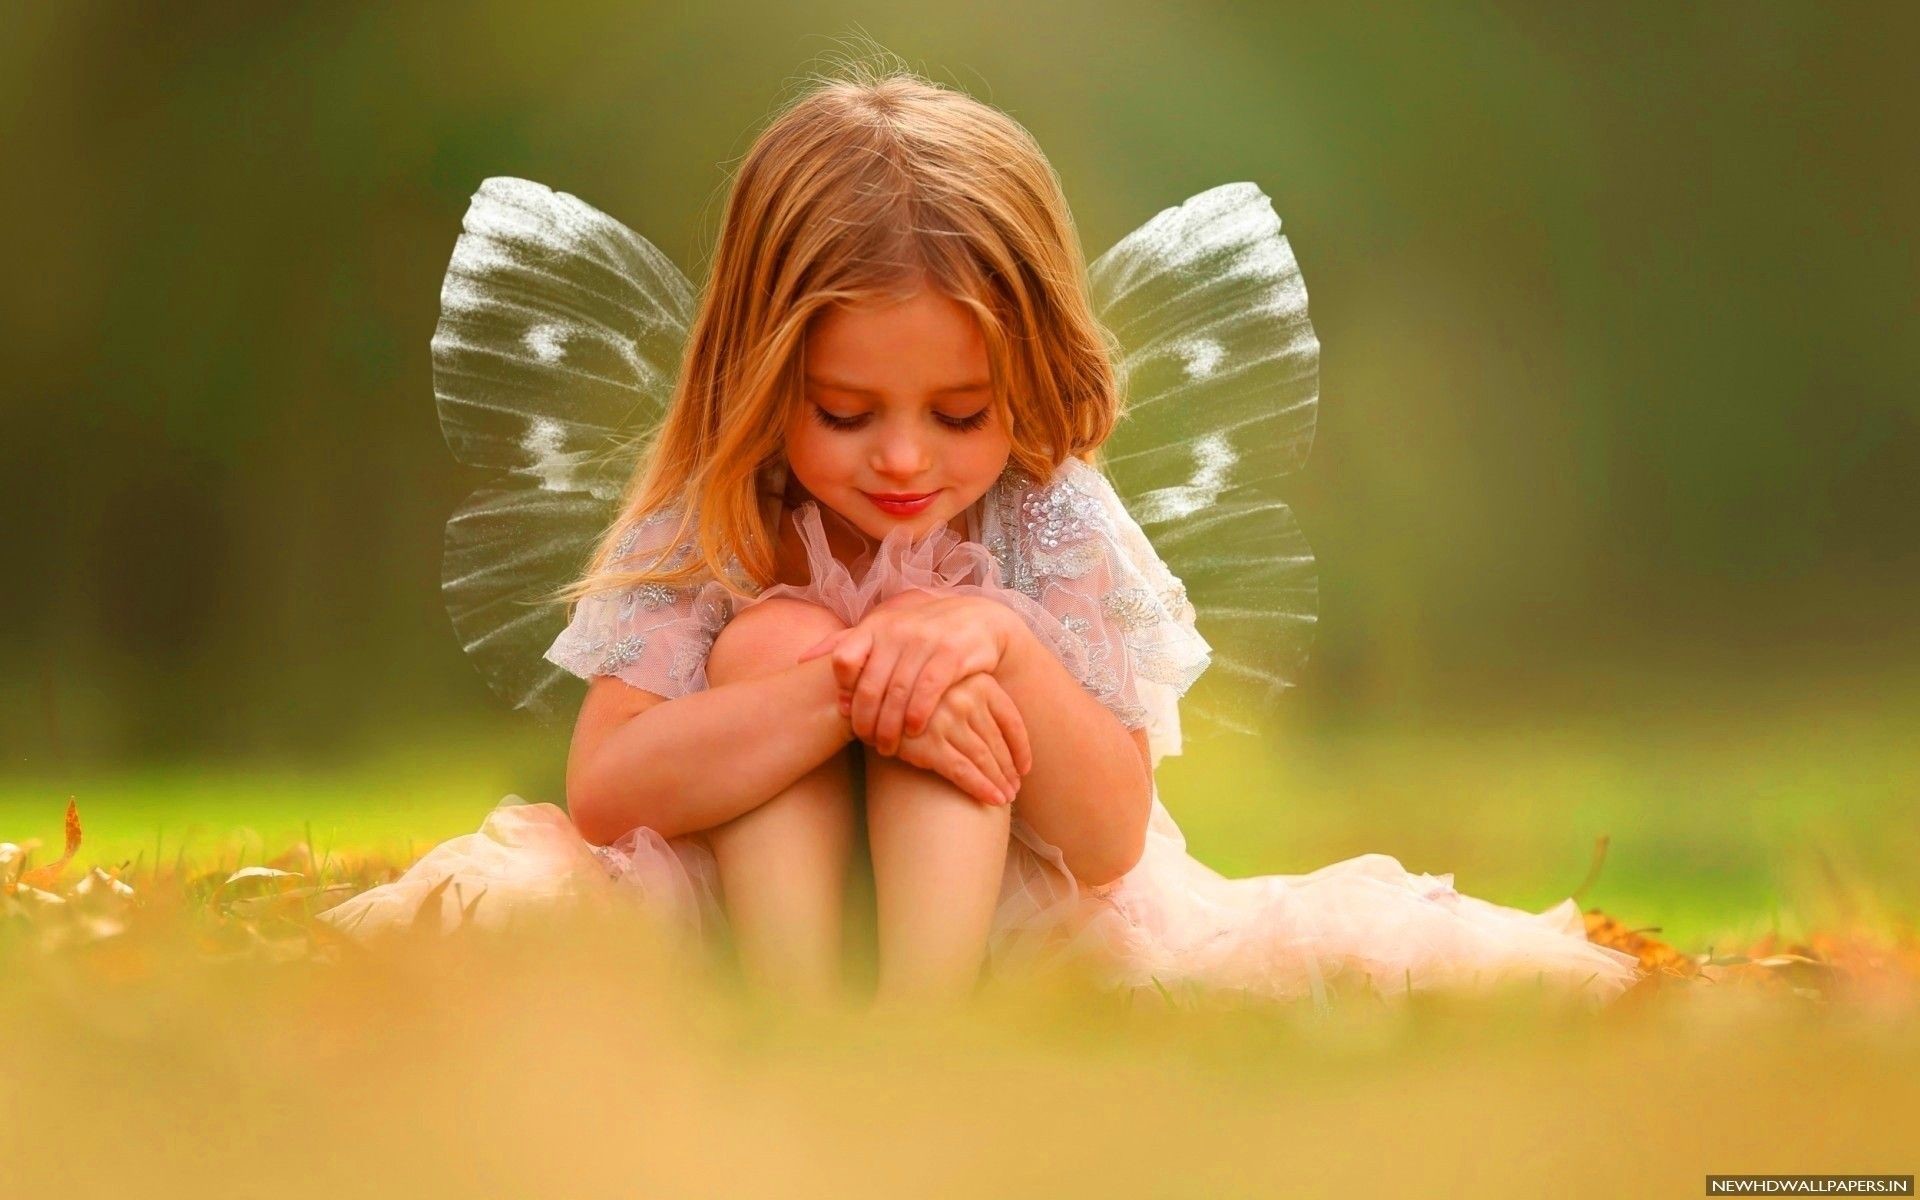 1920x1200 Cute Little Girl HD Wallpaper For PC, Laptop and Mobile